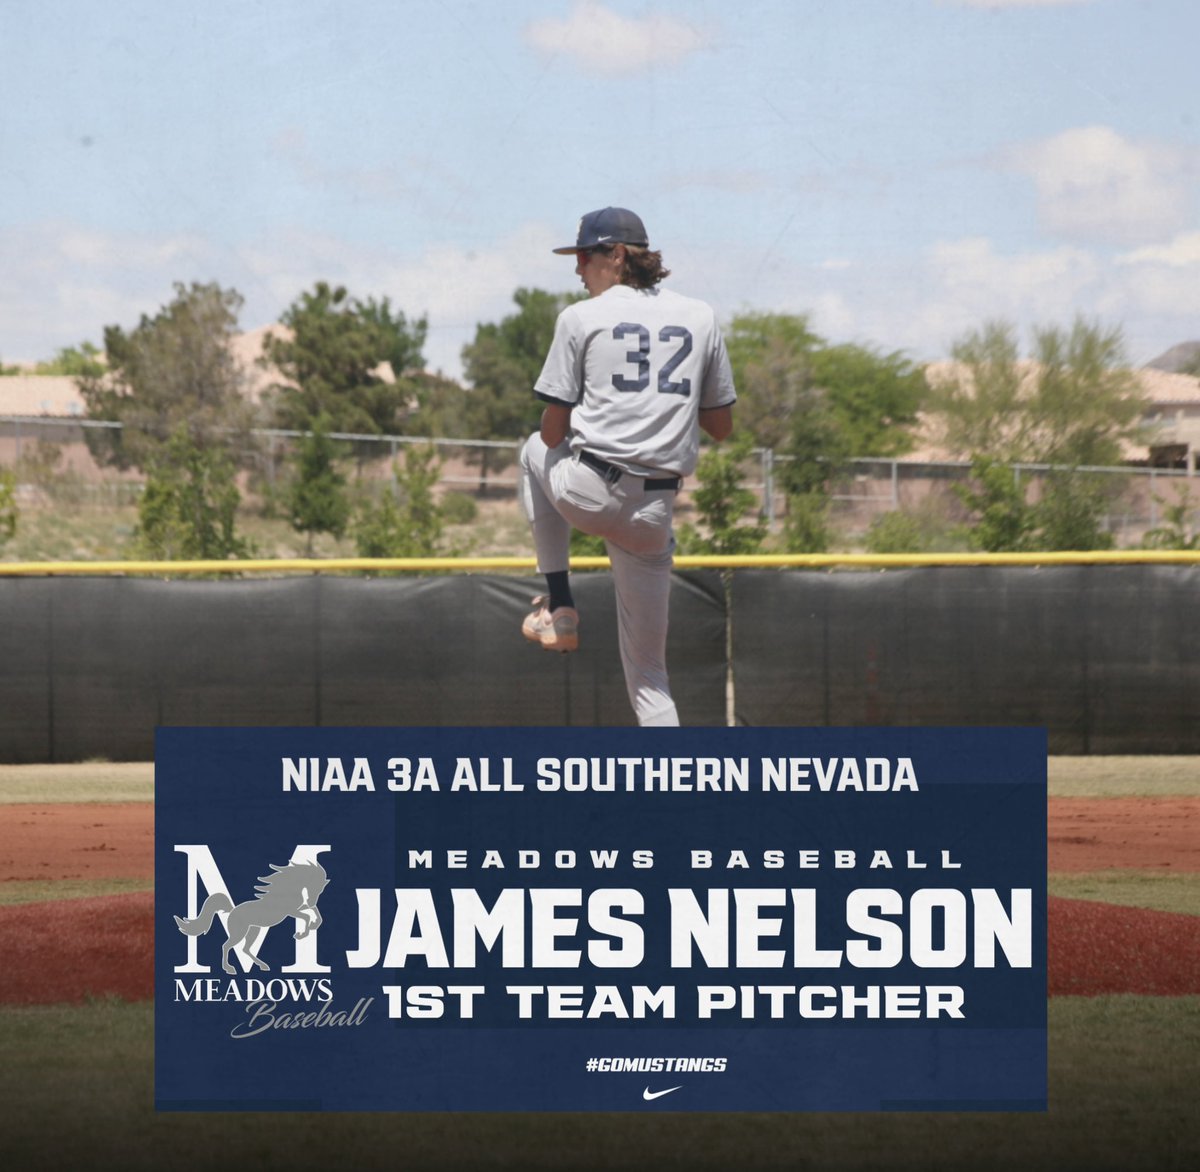 Congrats to Meadows Junior James Nelson for being selected as the NIAA 3A All Southern Nevada 1st Team Pitcher. Great job Jamie! #allleague #GoMustangs #BigBlue #family #believe #ibelieve #Road2State #BandOfBrothers #meadowsbaseball #lasvegas #baseball #MFRA #studentathlete